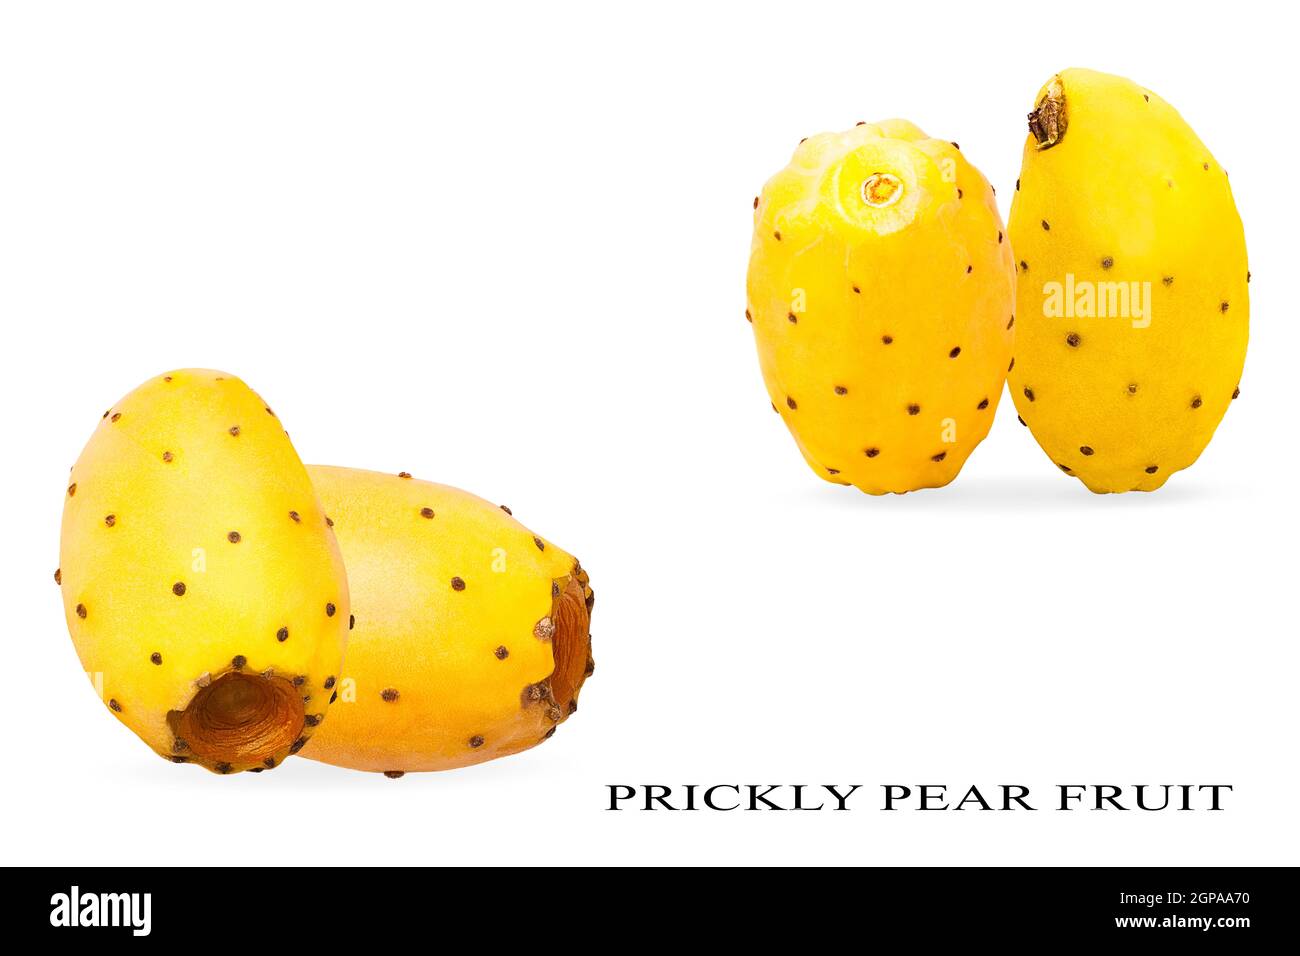 Isolated prickly pear fruits with shadow for packaging and advertisement. Full depth of field. Clip art image for package design. Copyspace for text. Stock Photo